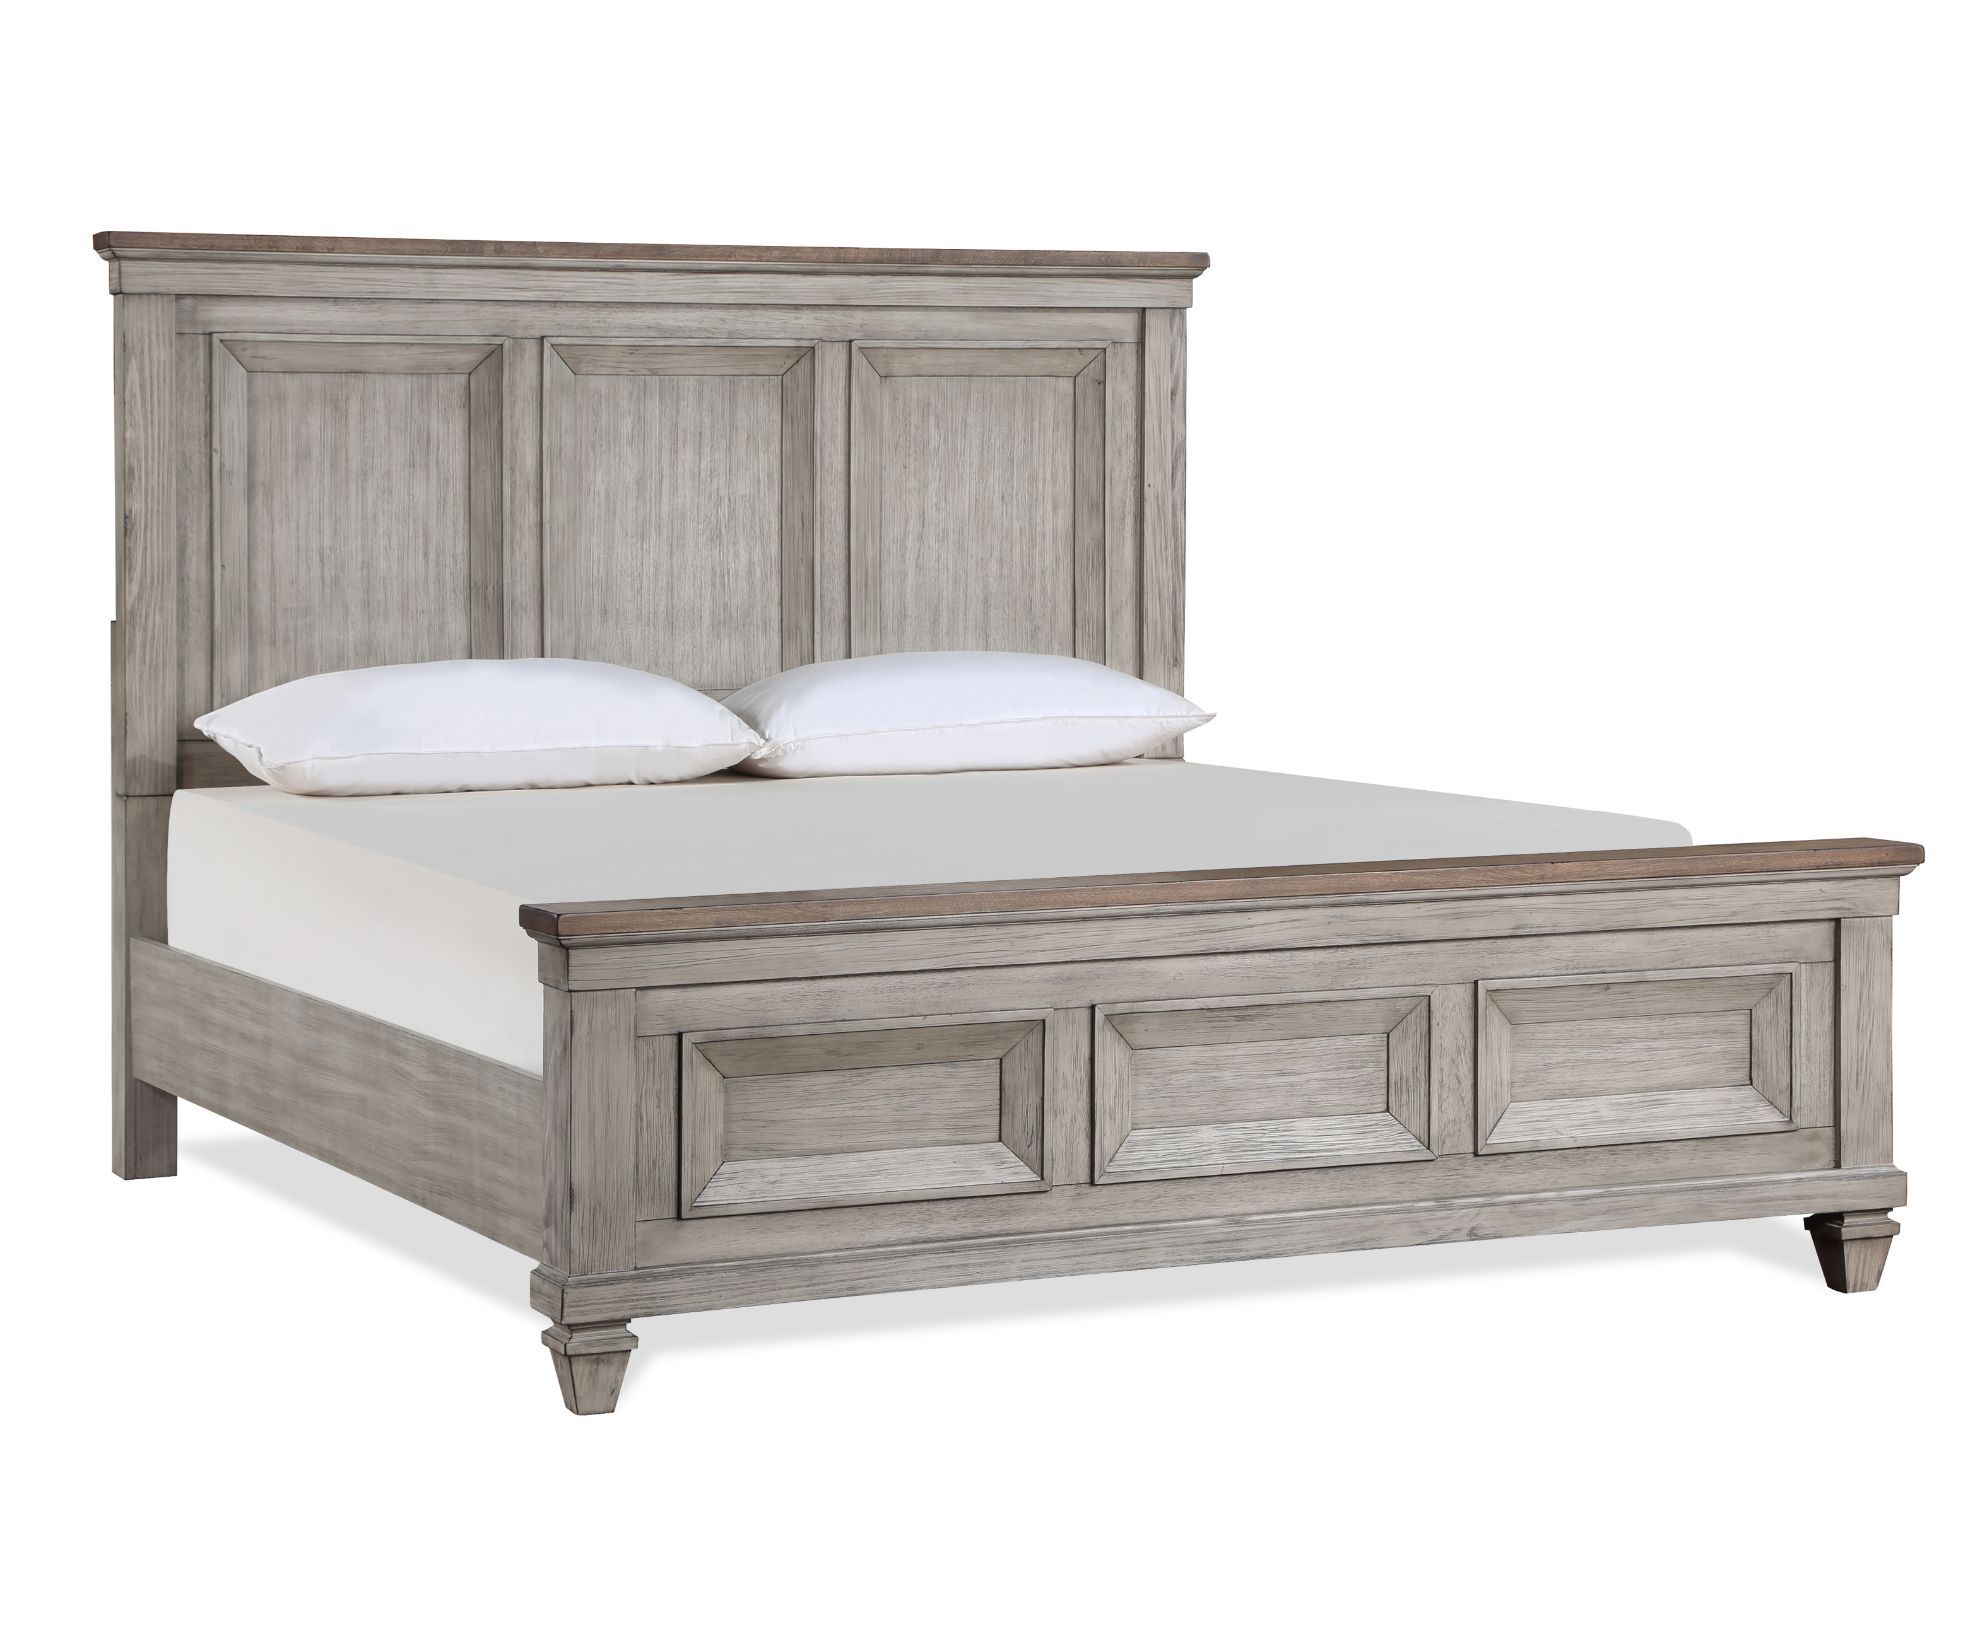 Mariana Creme Queen Bed